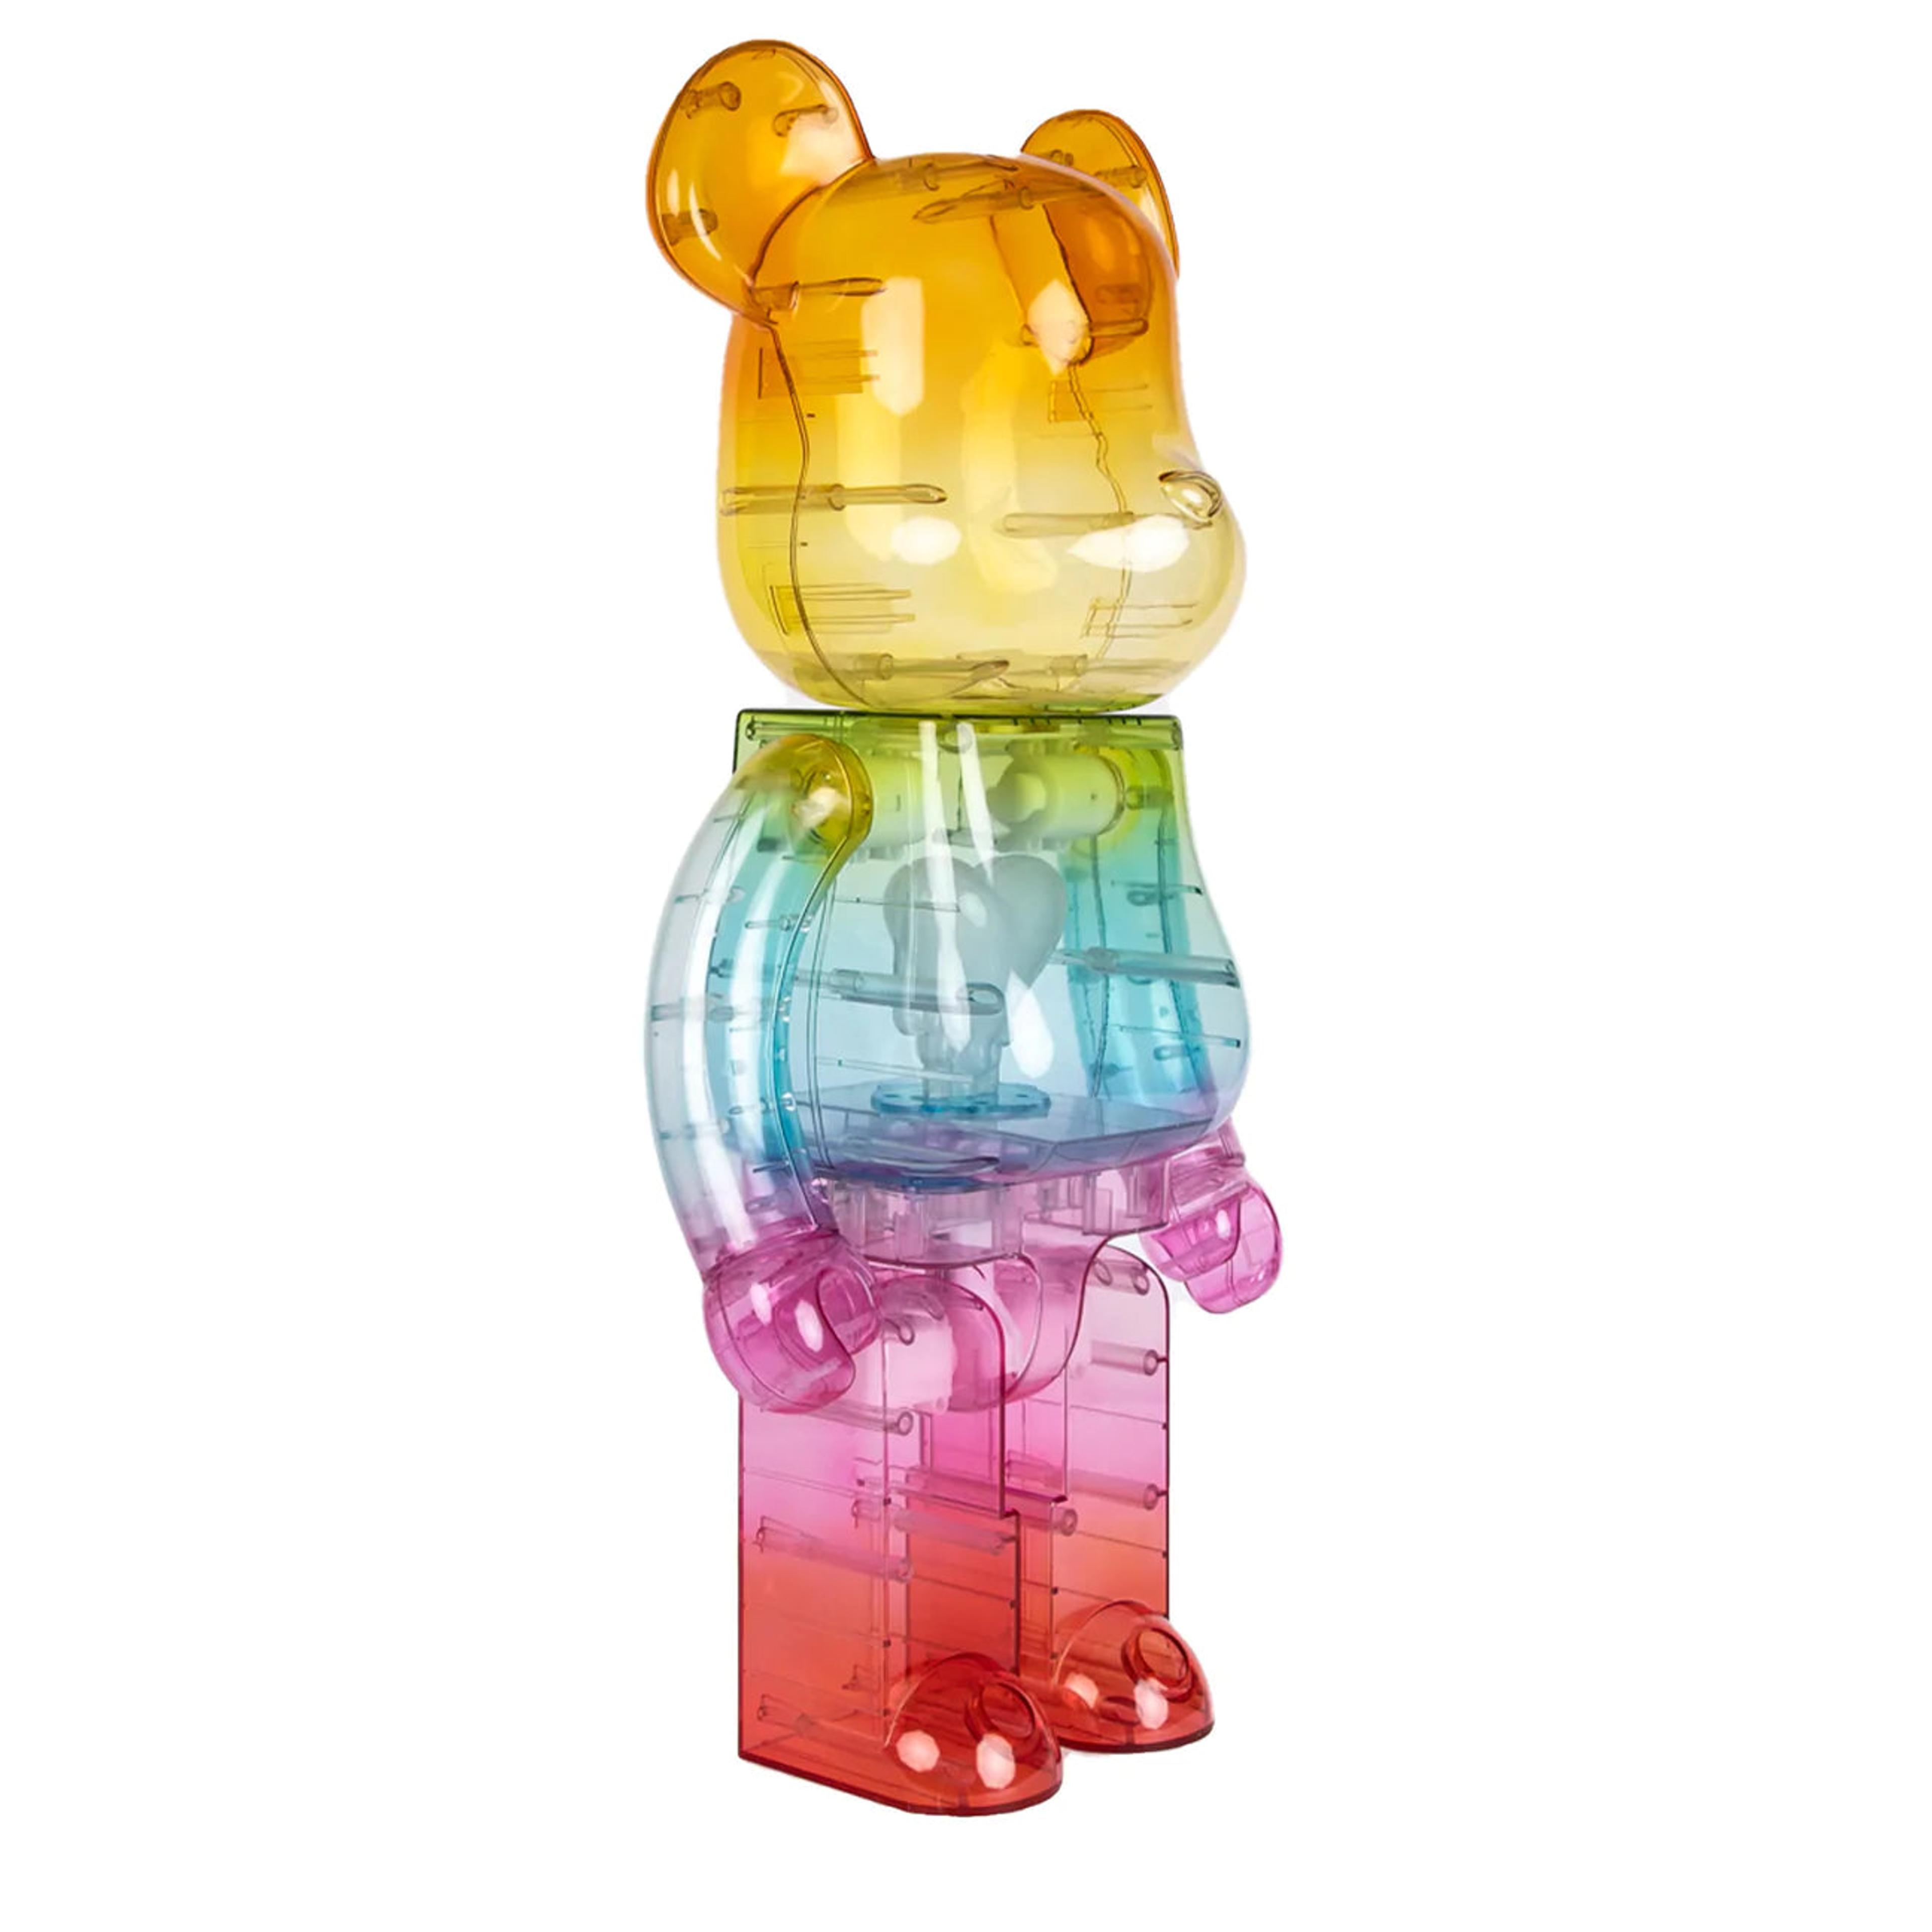 Alternate View 2 of Emotionally Unavailable Gradient BE@RBRICK 1000%